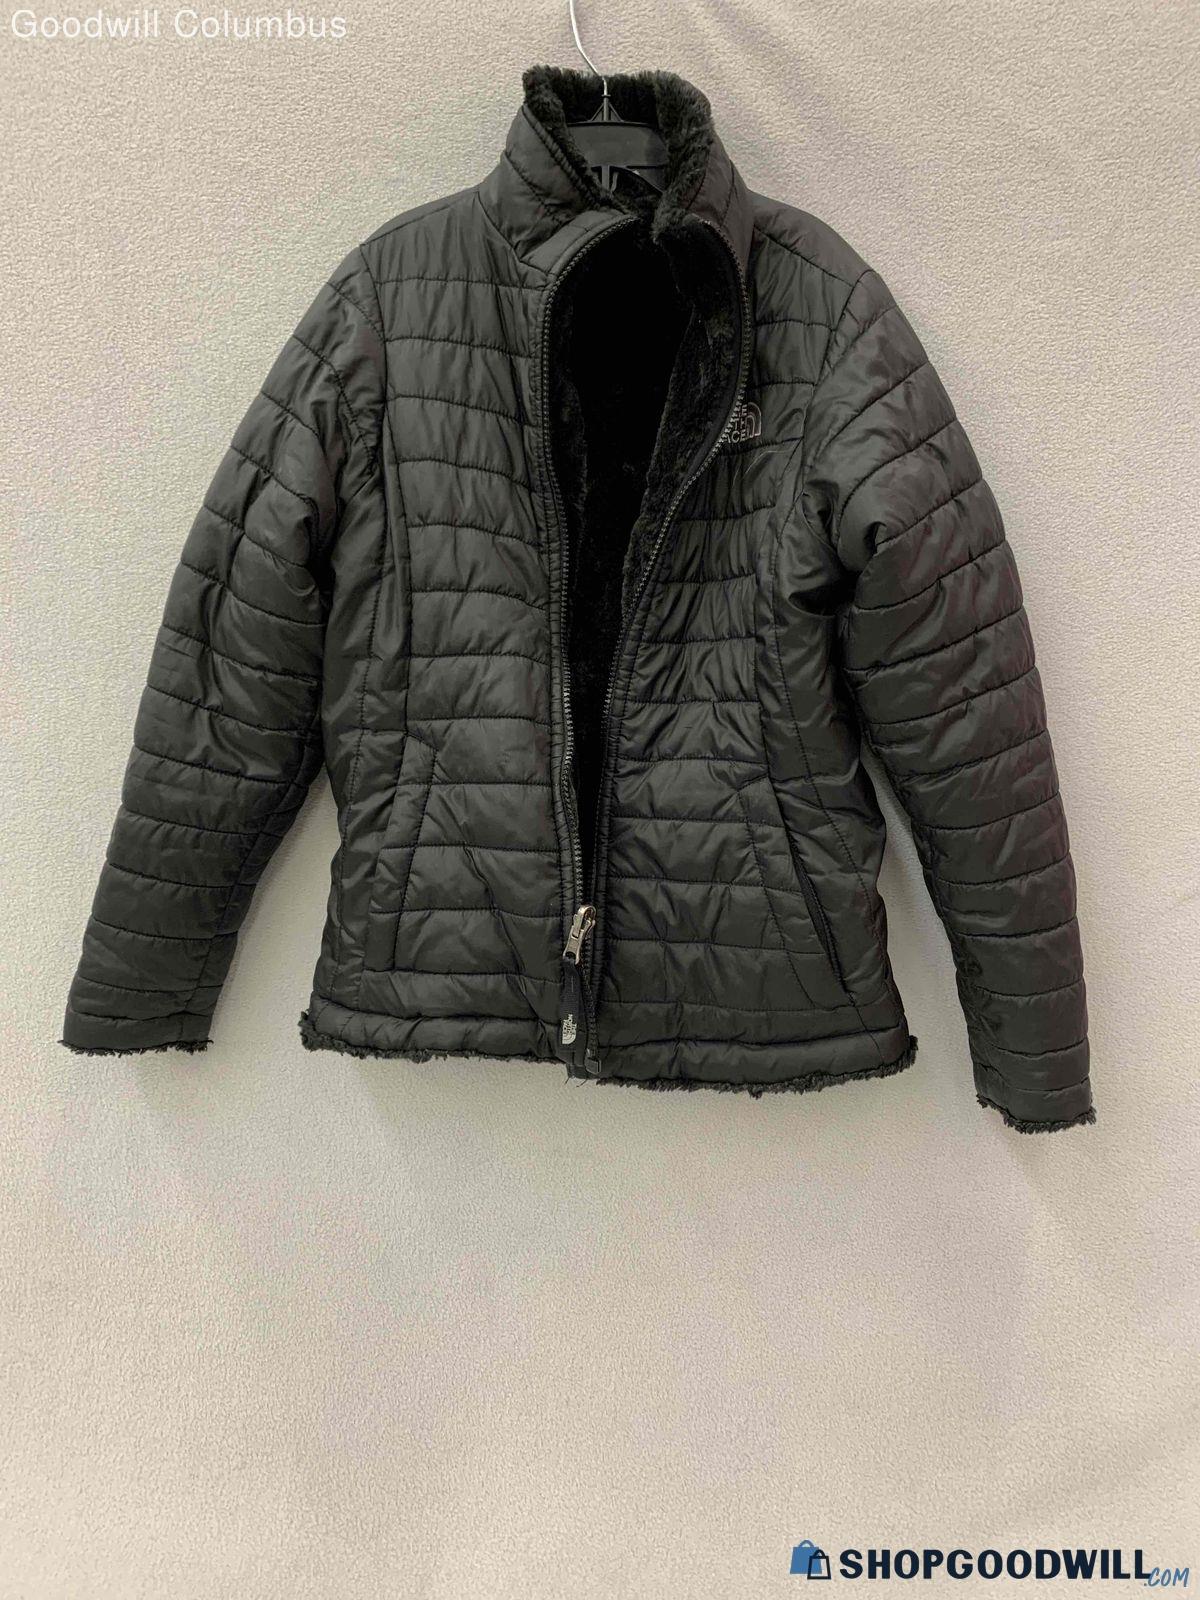 The North Face Black Jacket Kids Size M 10/12 - shopgoodwill.com